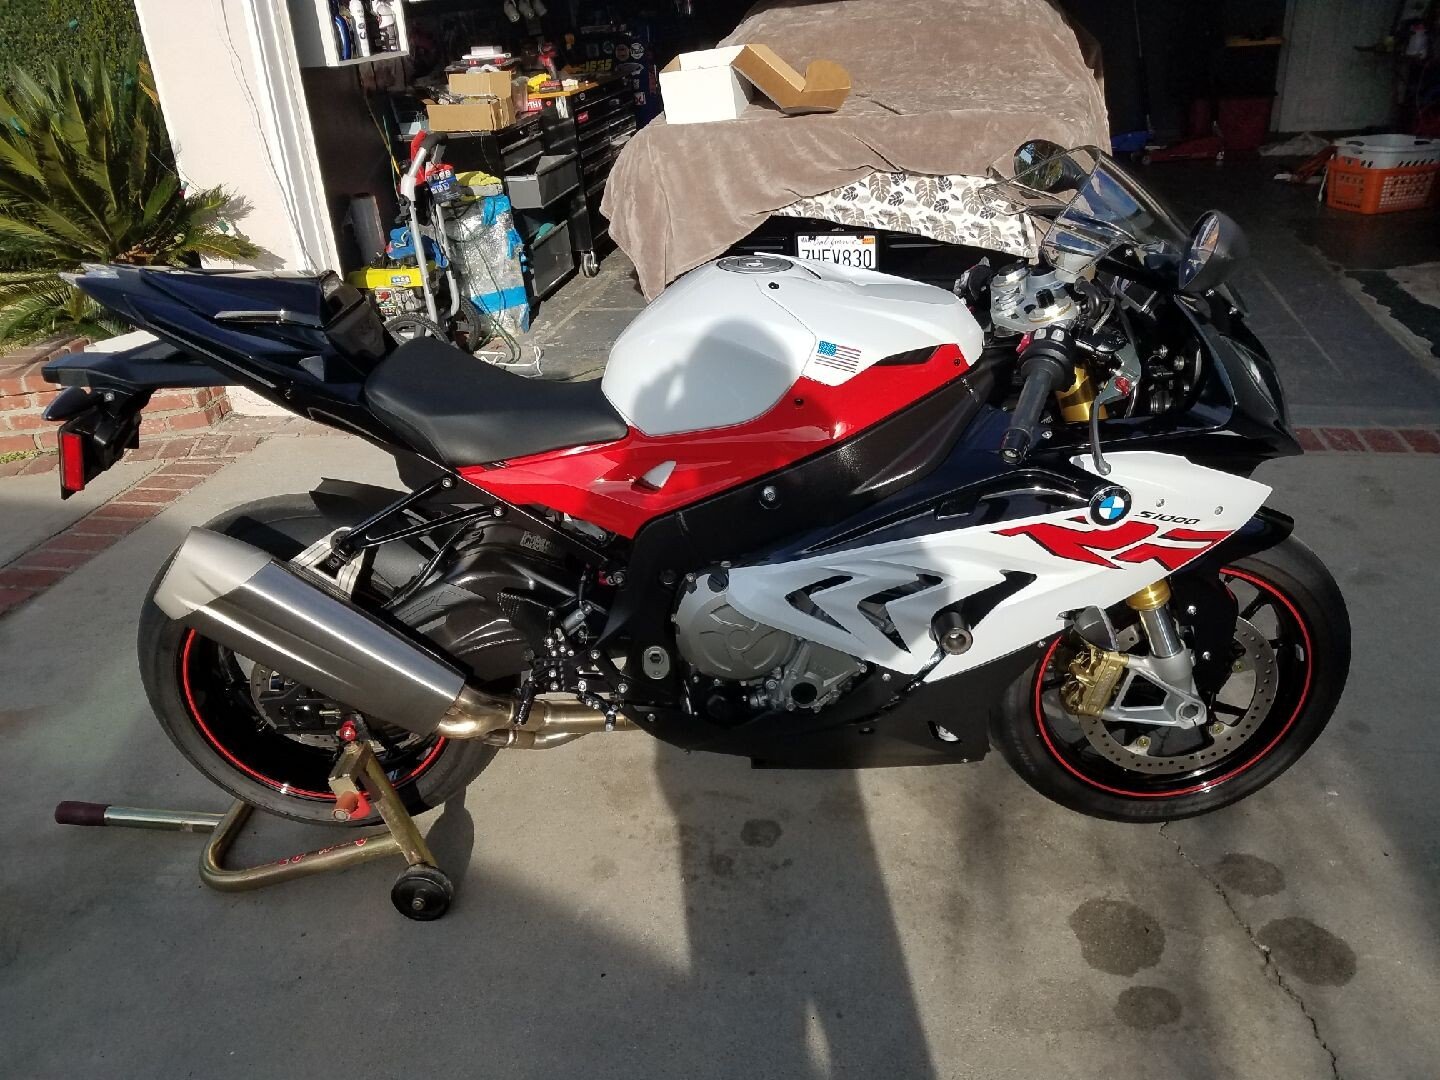 BMW S1000RR Motorcycles for Sale - Motorcycles on Autotrader